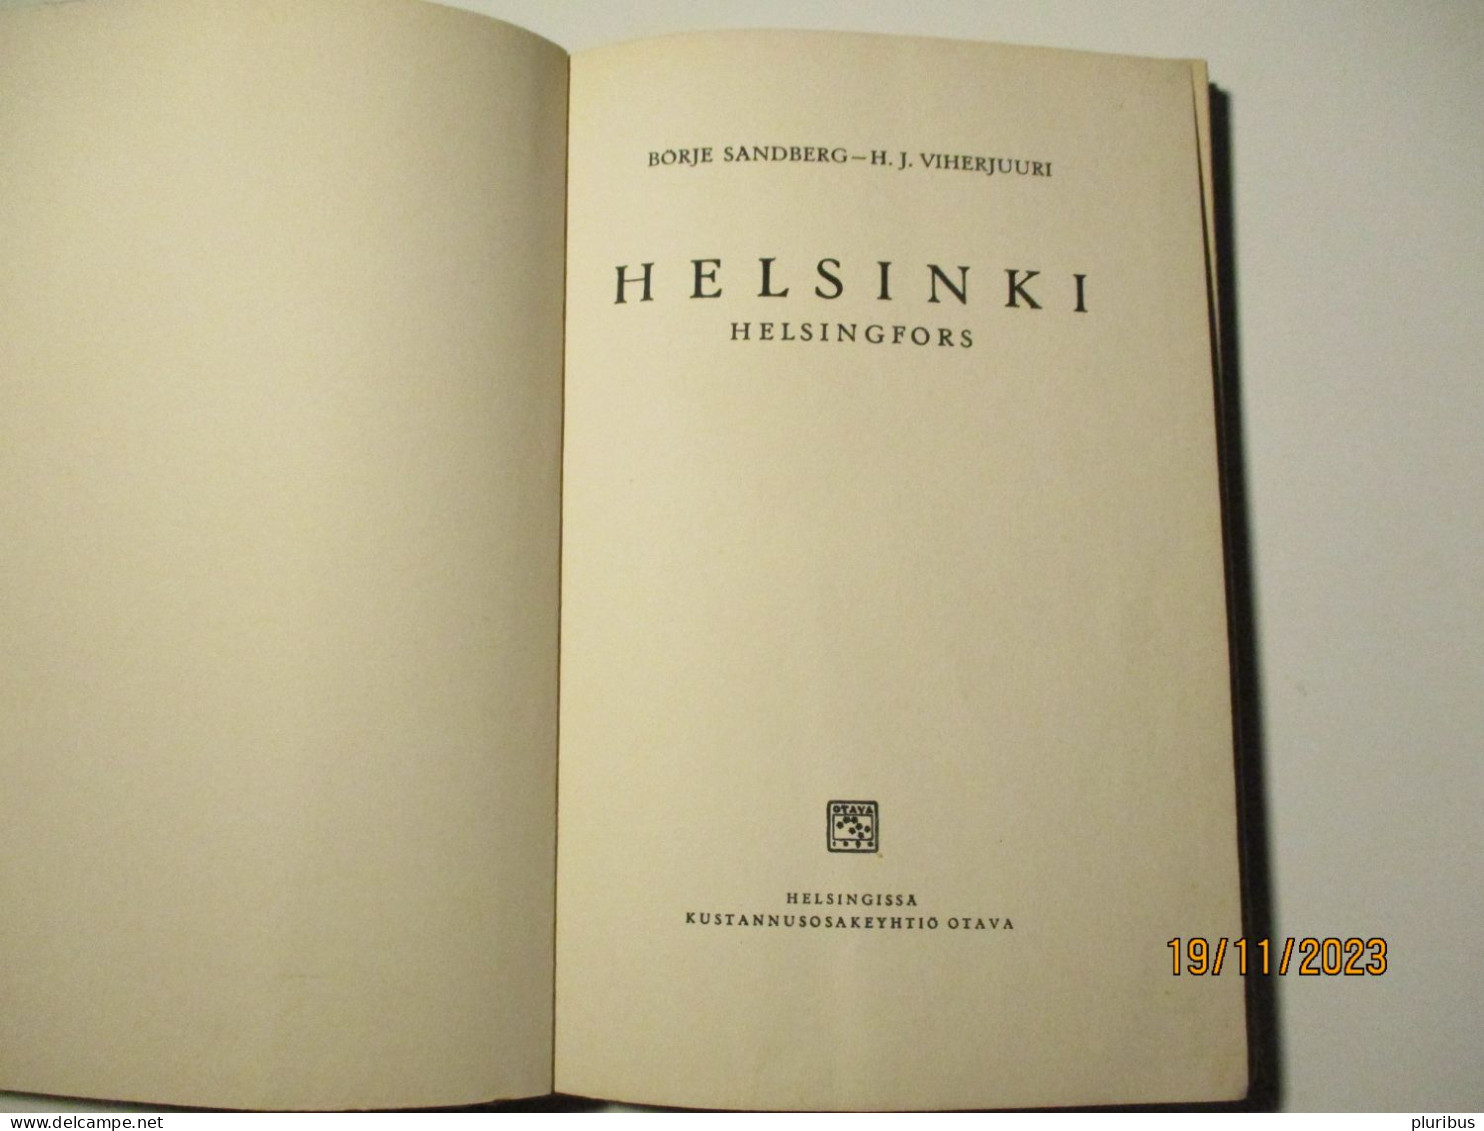 FINLAND 1937 HELSINKI HELSINGFORS THE WHITE CITY OF THE NORTH - Scandinavian Languages